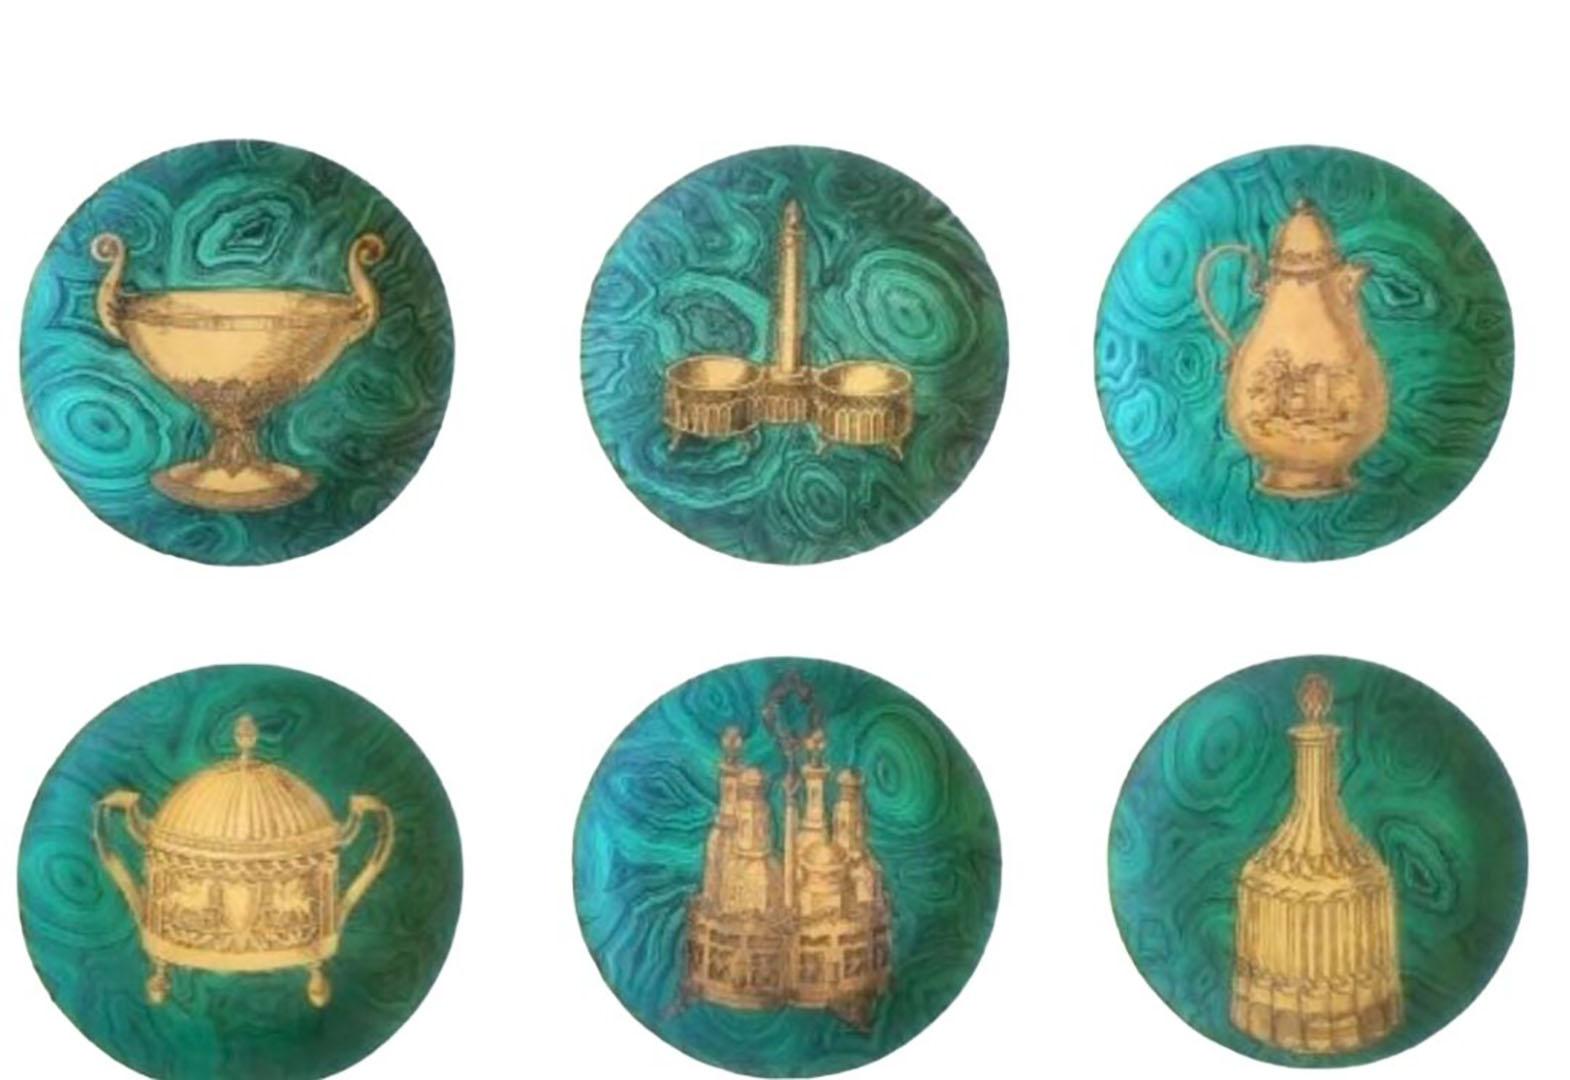 A set of twelve Stoviglie malachite plates by Piero Fornasetti with gold designs of pitchers, gilt cup and saucer, urns, vases, curette and more. Circa 1950, Italy. Ref. Fornasetti, the complete Universe, Barnaba Fornasetti. Pg.614, #162 plate with